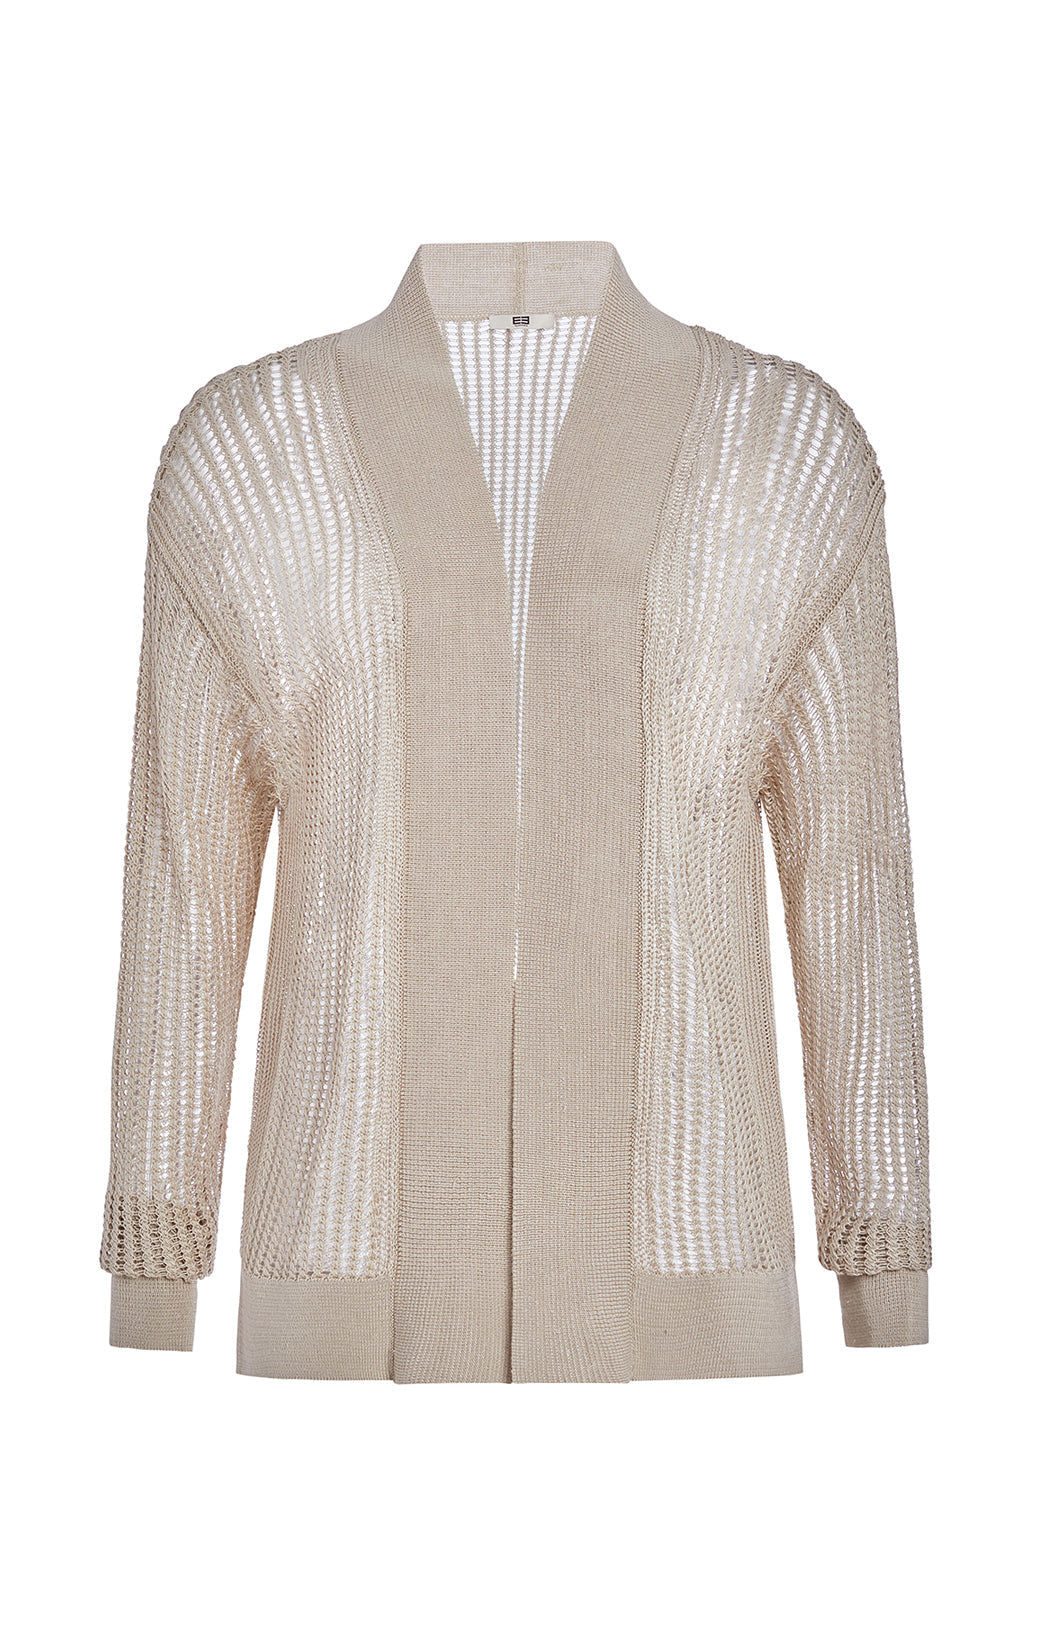 Corsican - Asymmetrical Pullover Knit Top In Contrast Stitches - Product Image